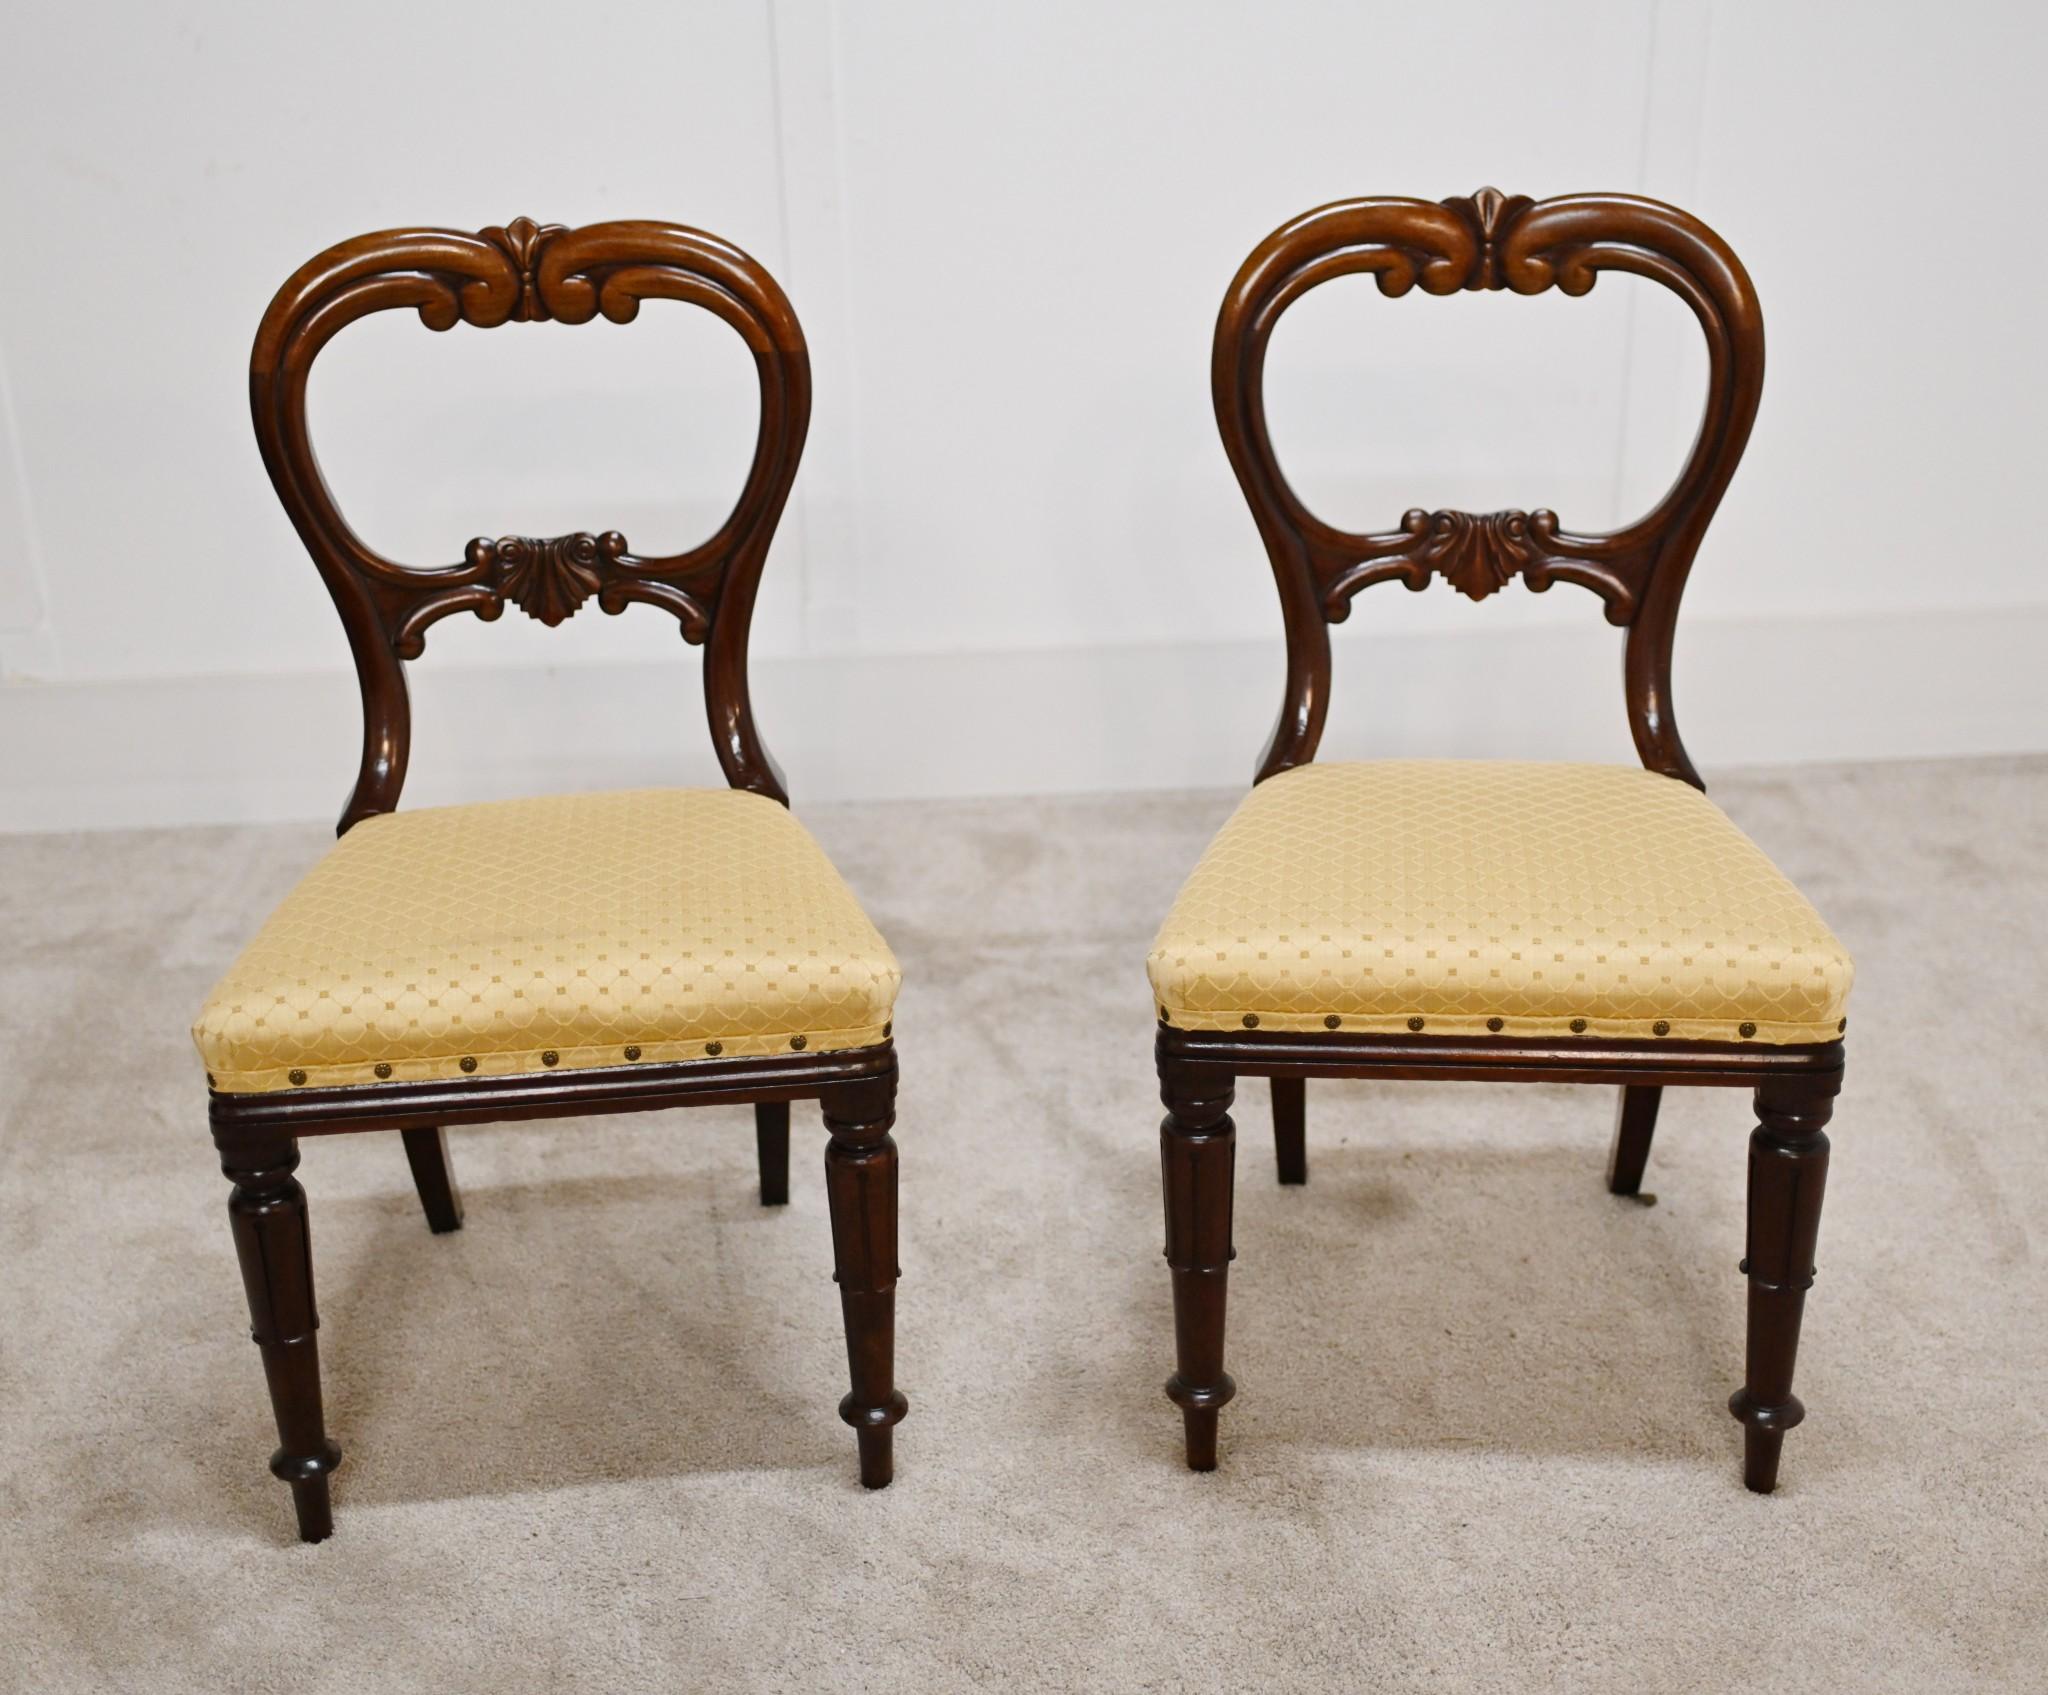 Gorgeous set of Victorian dining chairs in mahogany
Recently upholstered so clean and free from odours
Set consists of six side chairs with tulip legs
Circa 1840
We have various tables to match if you are looking for a complete dining suite
Offered